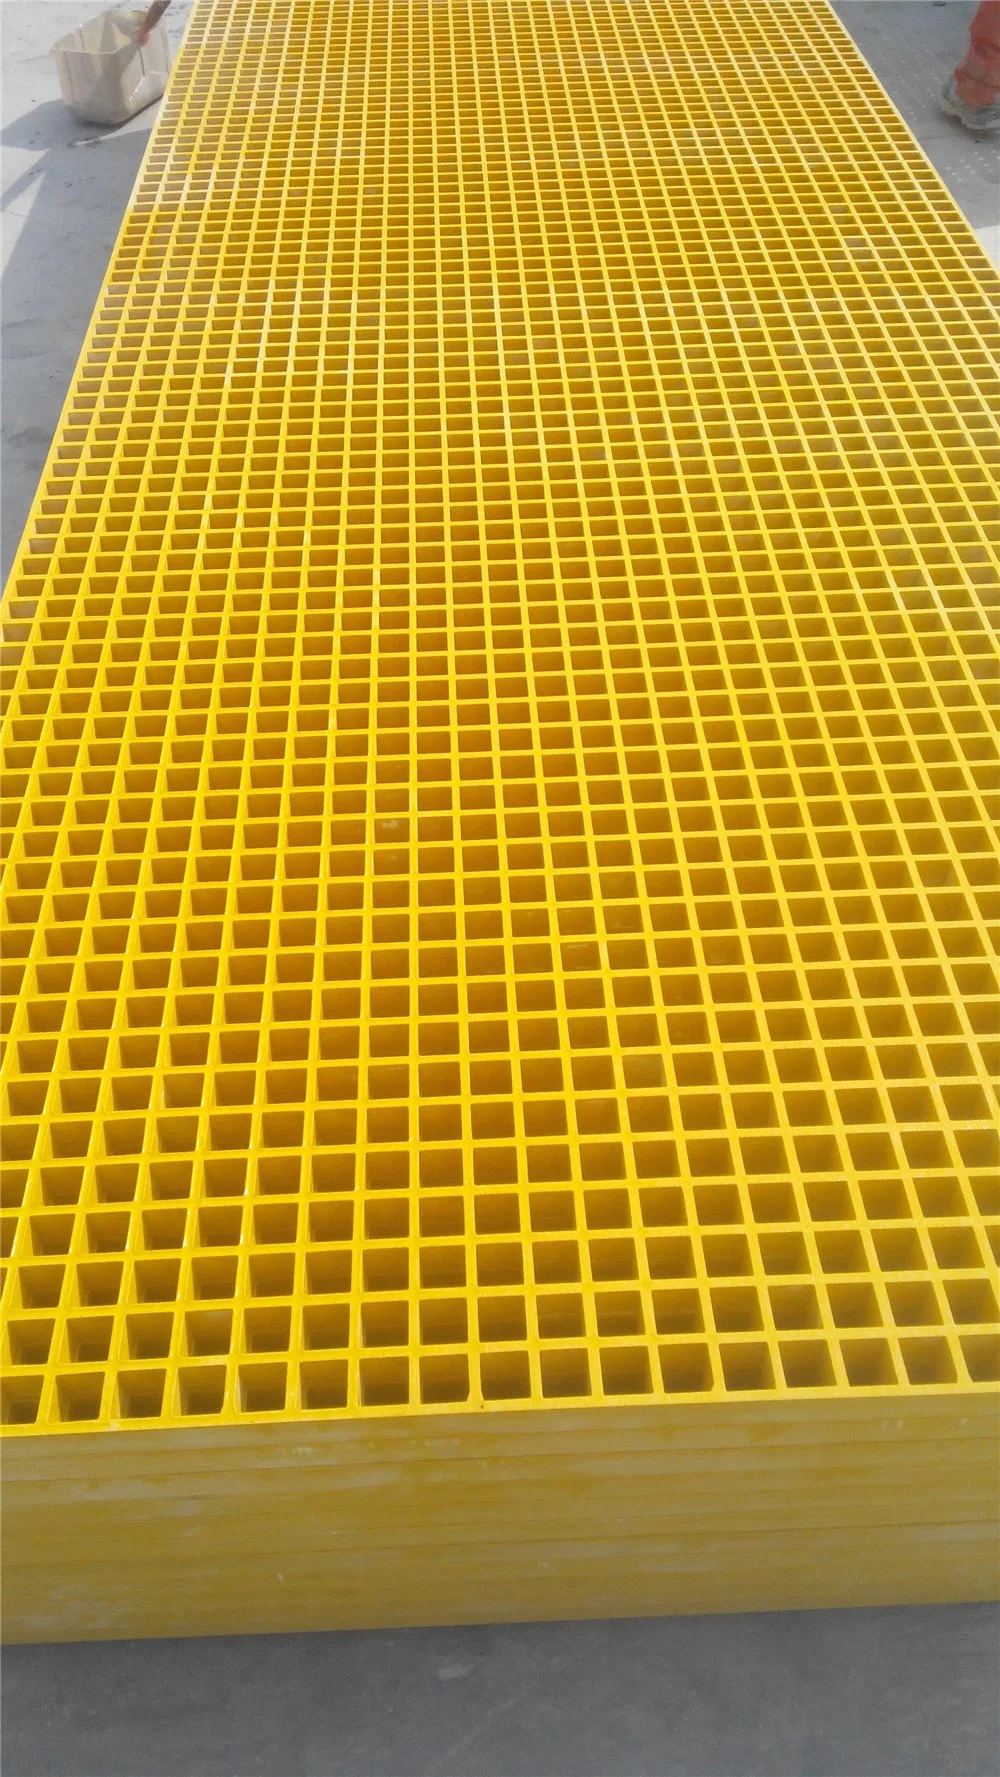 China Hot Sale High Strength FRP/GRP Molded Grating for Walkway